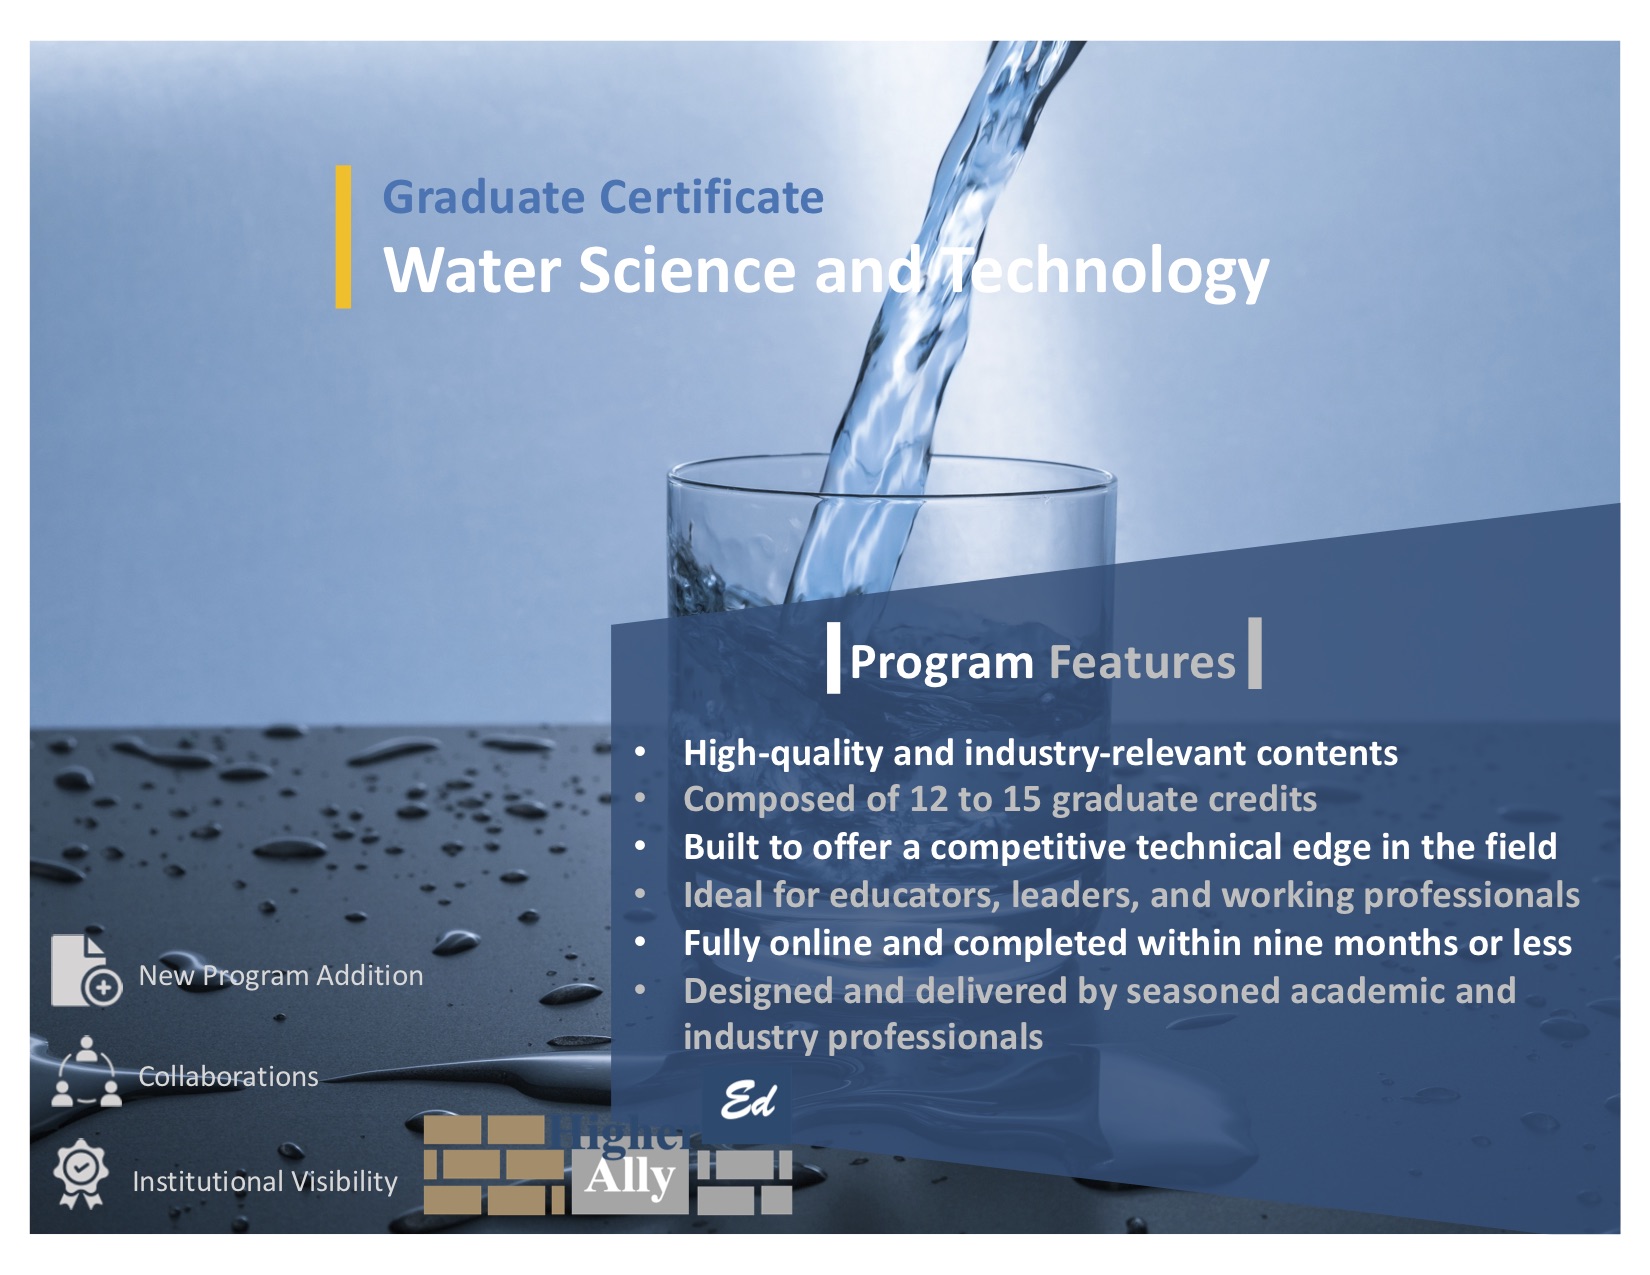 GC_WaterScience_Technology